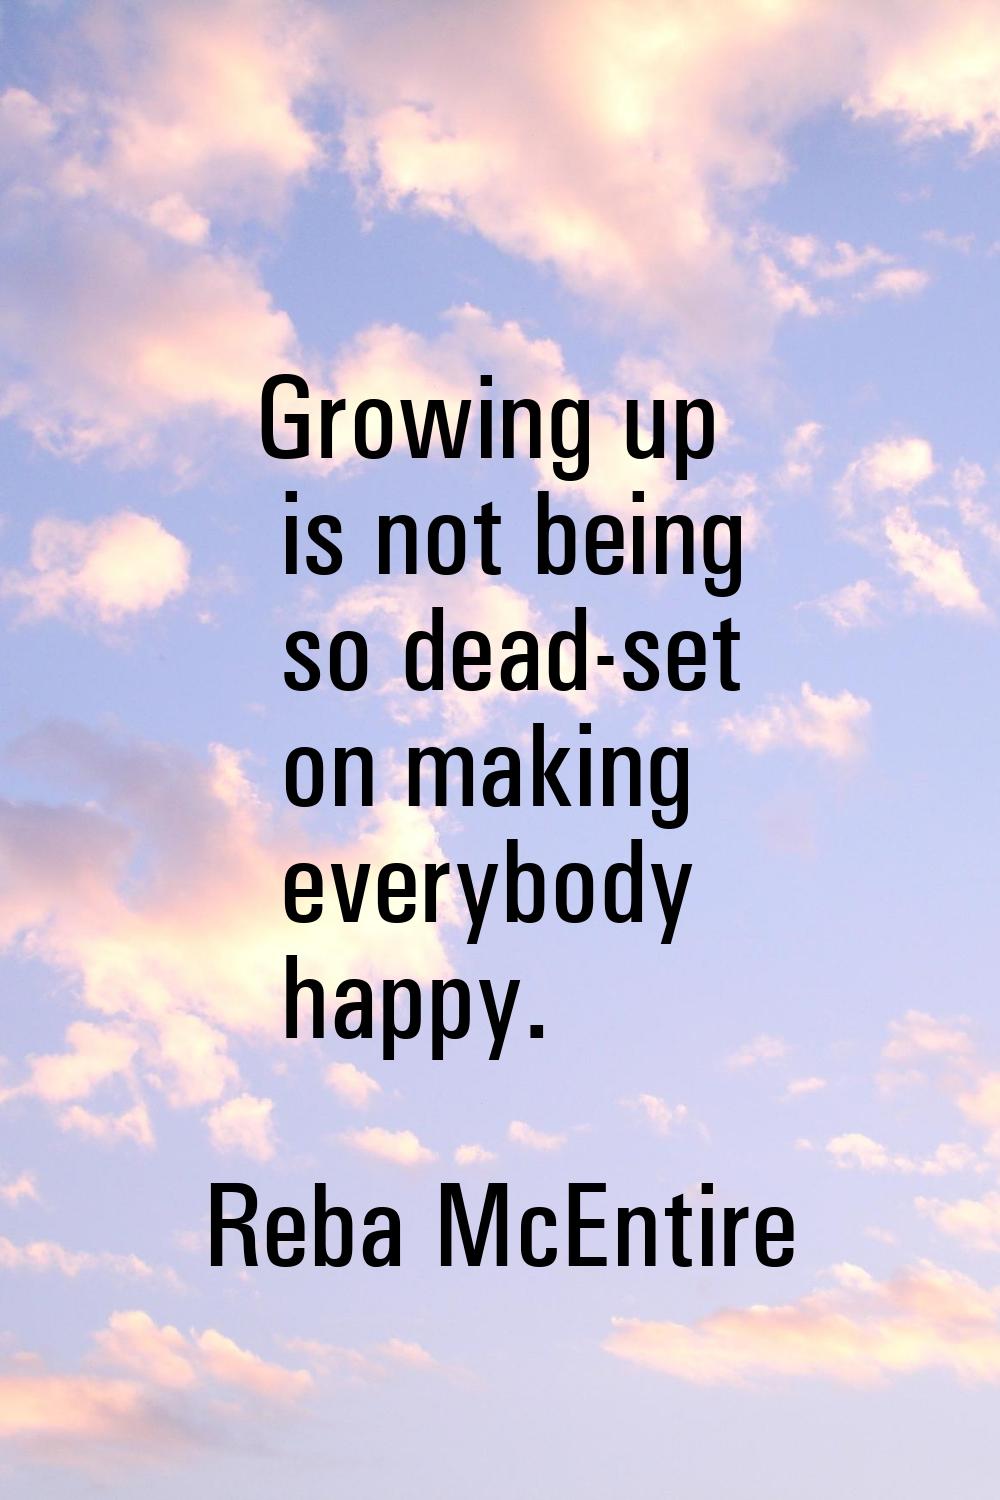 Growing up is not being so dead-set on making everybody happy.